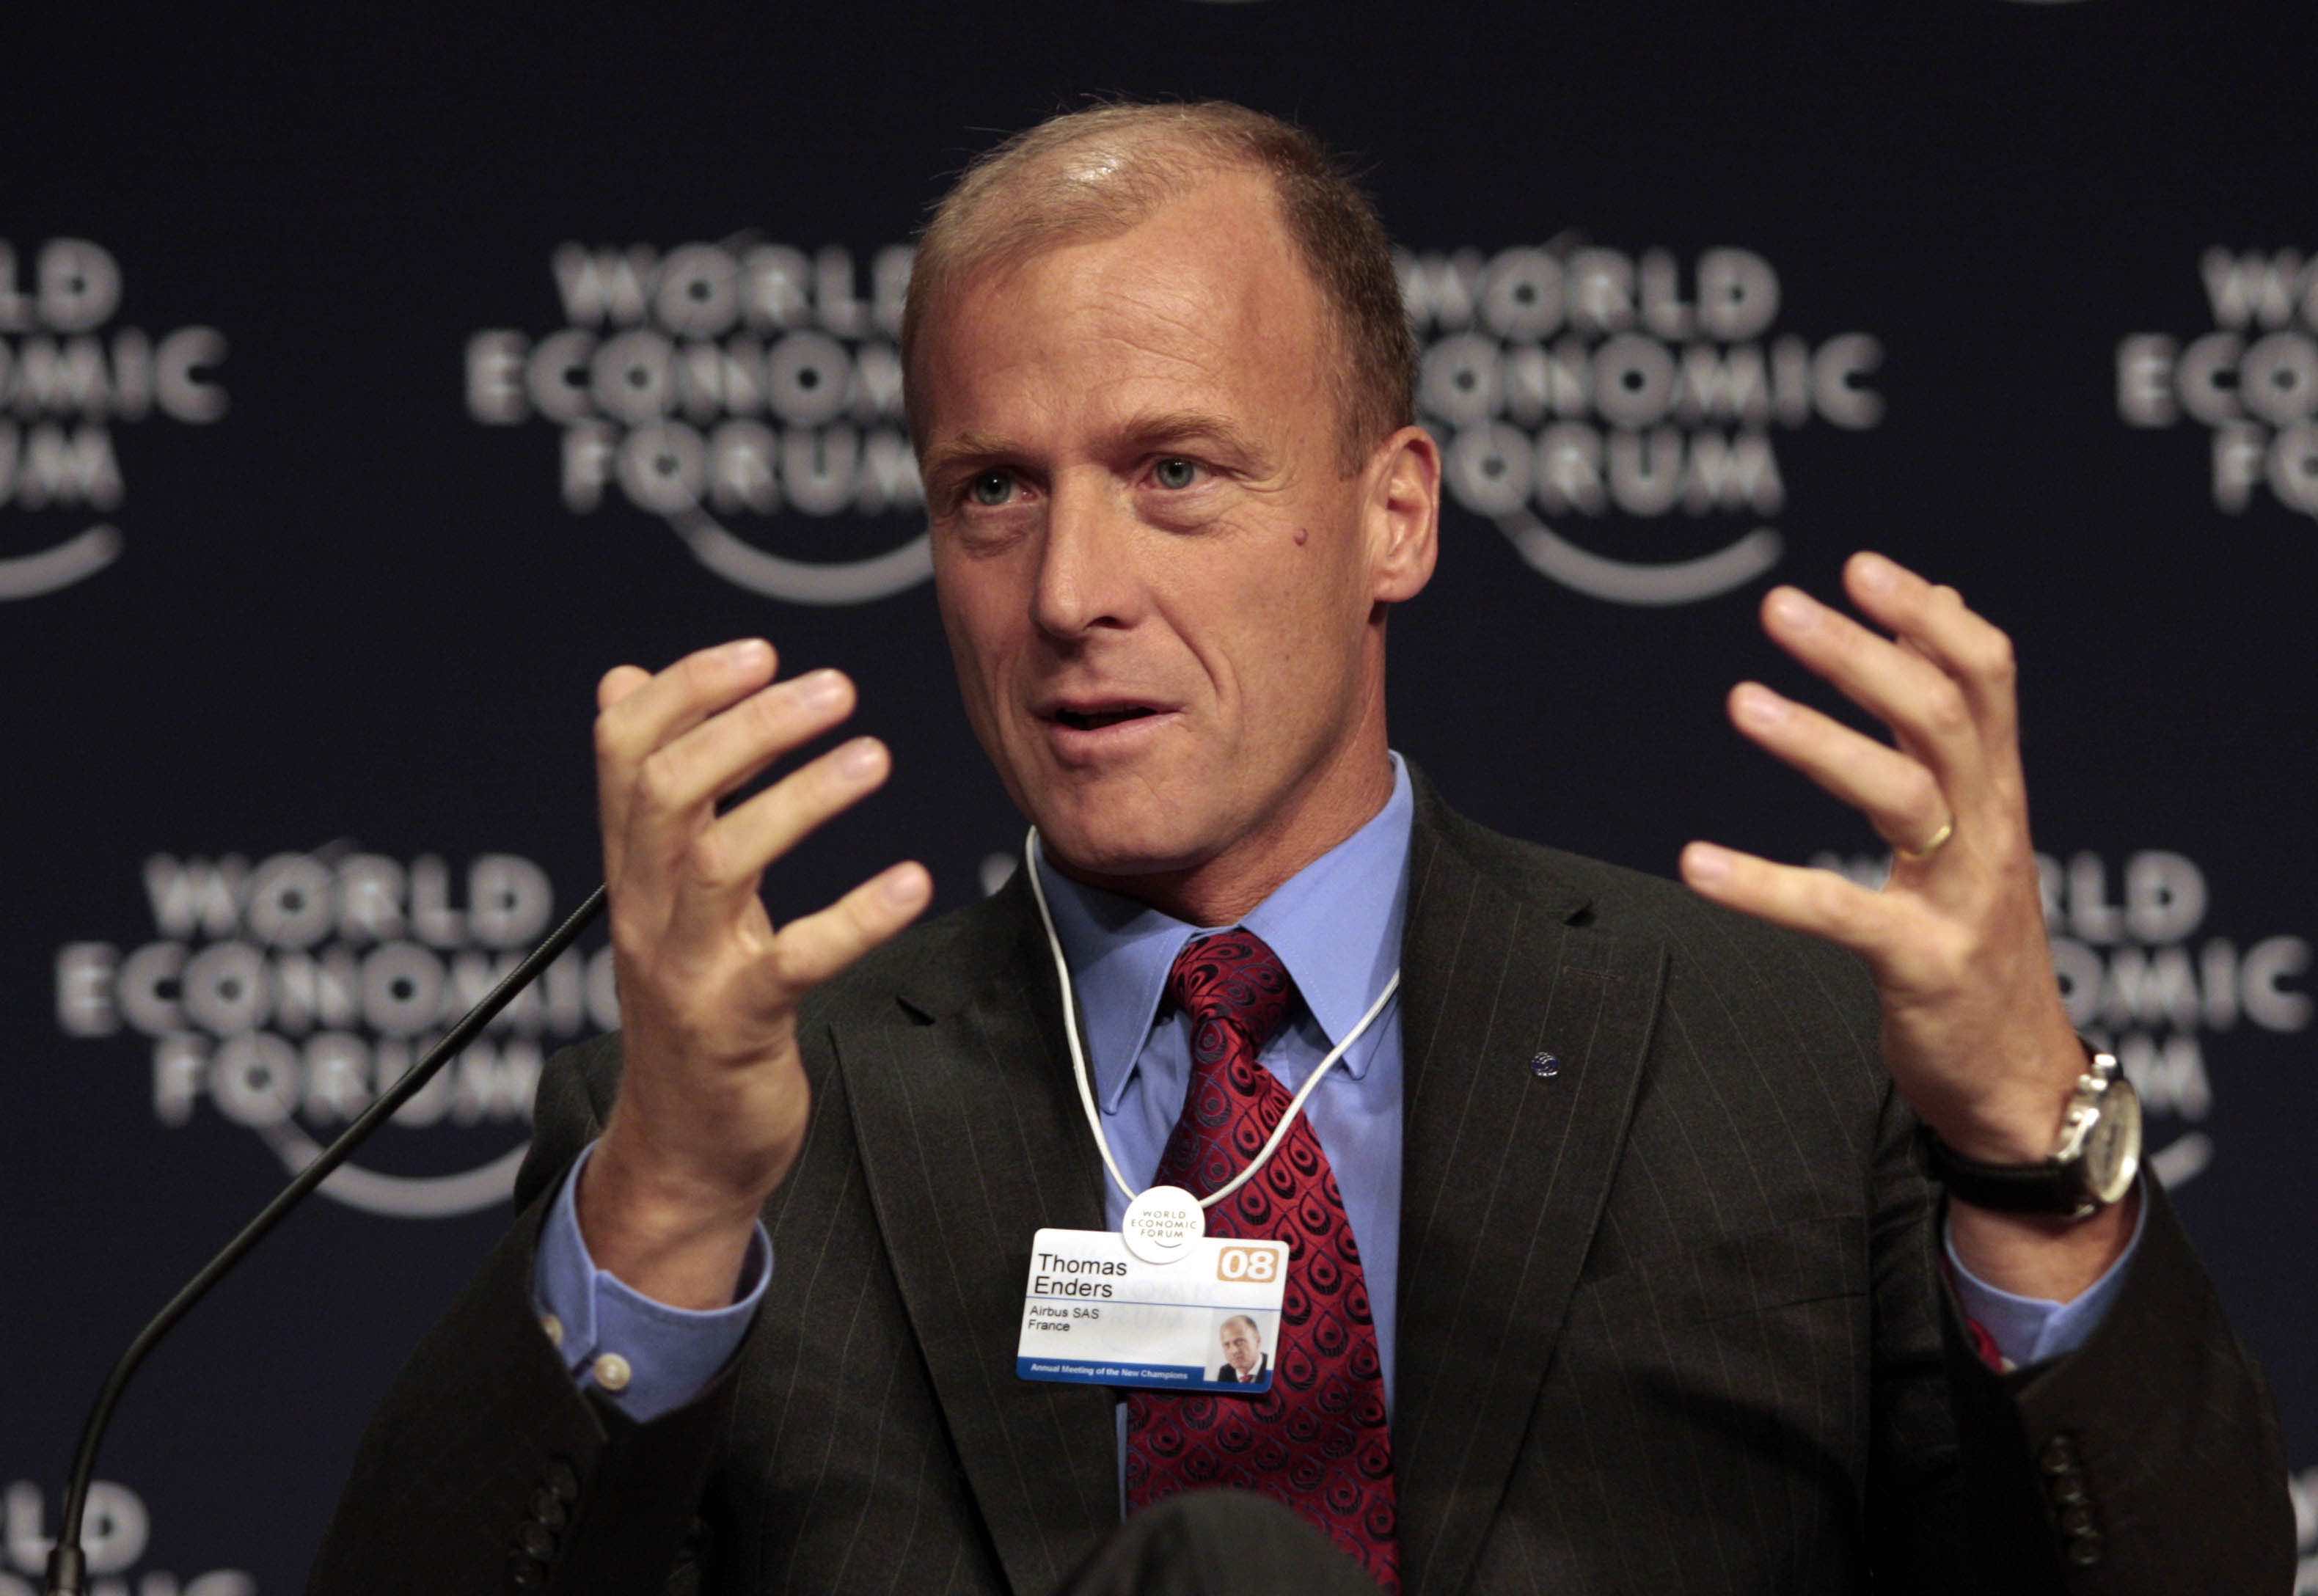 “Do not to hide the shit under the carpet” CEO Airbus Thomas Enders tells his company execs